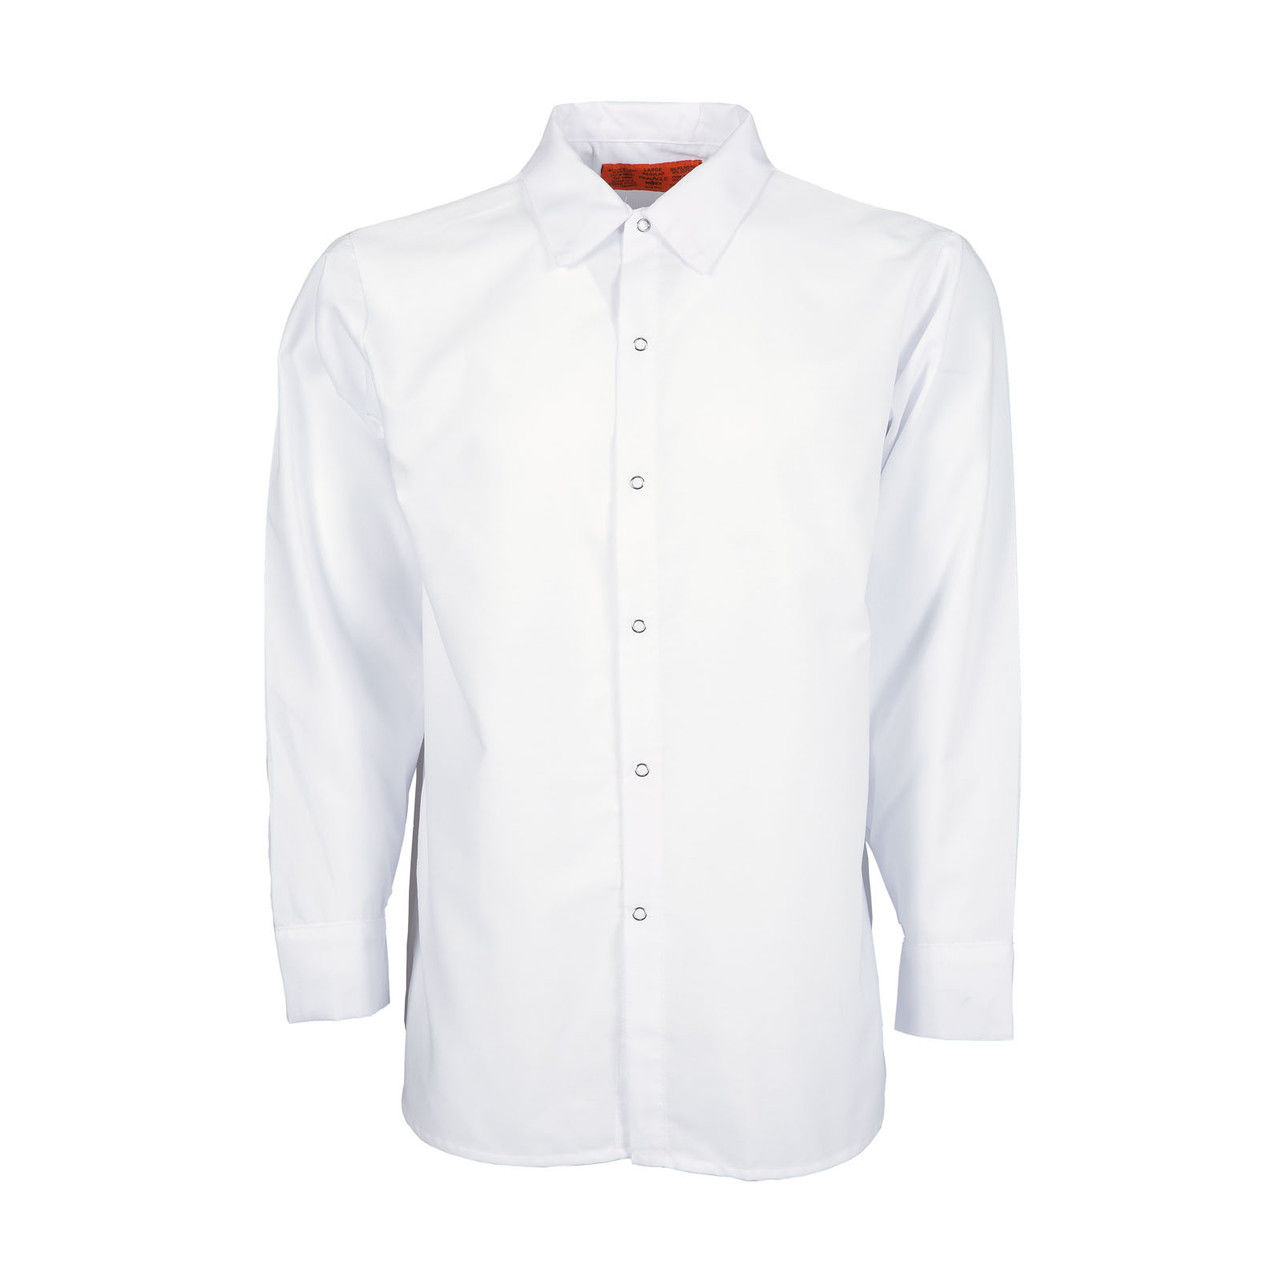 S14WH Men's Long Sleeve Work Shirt, White Questions & Answers